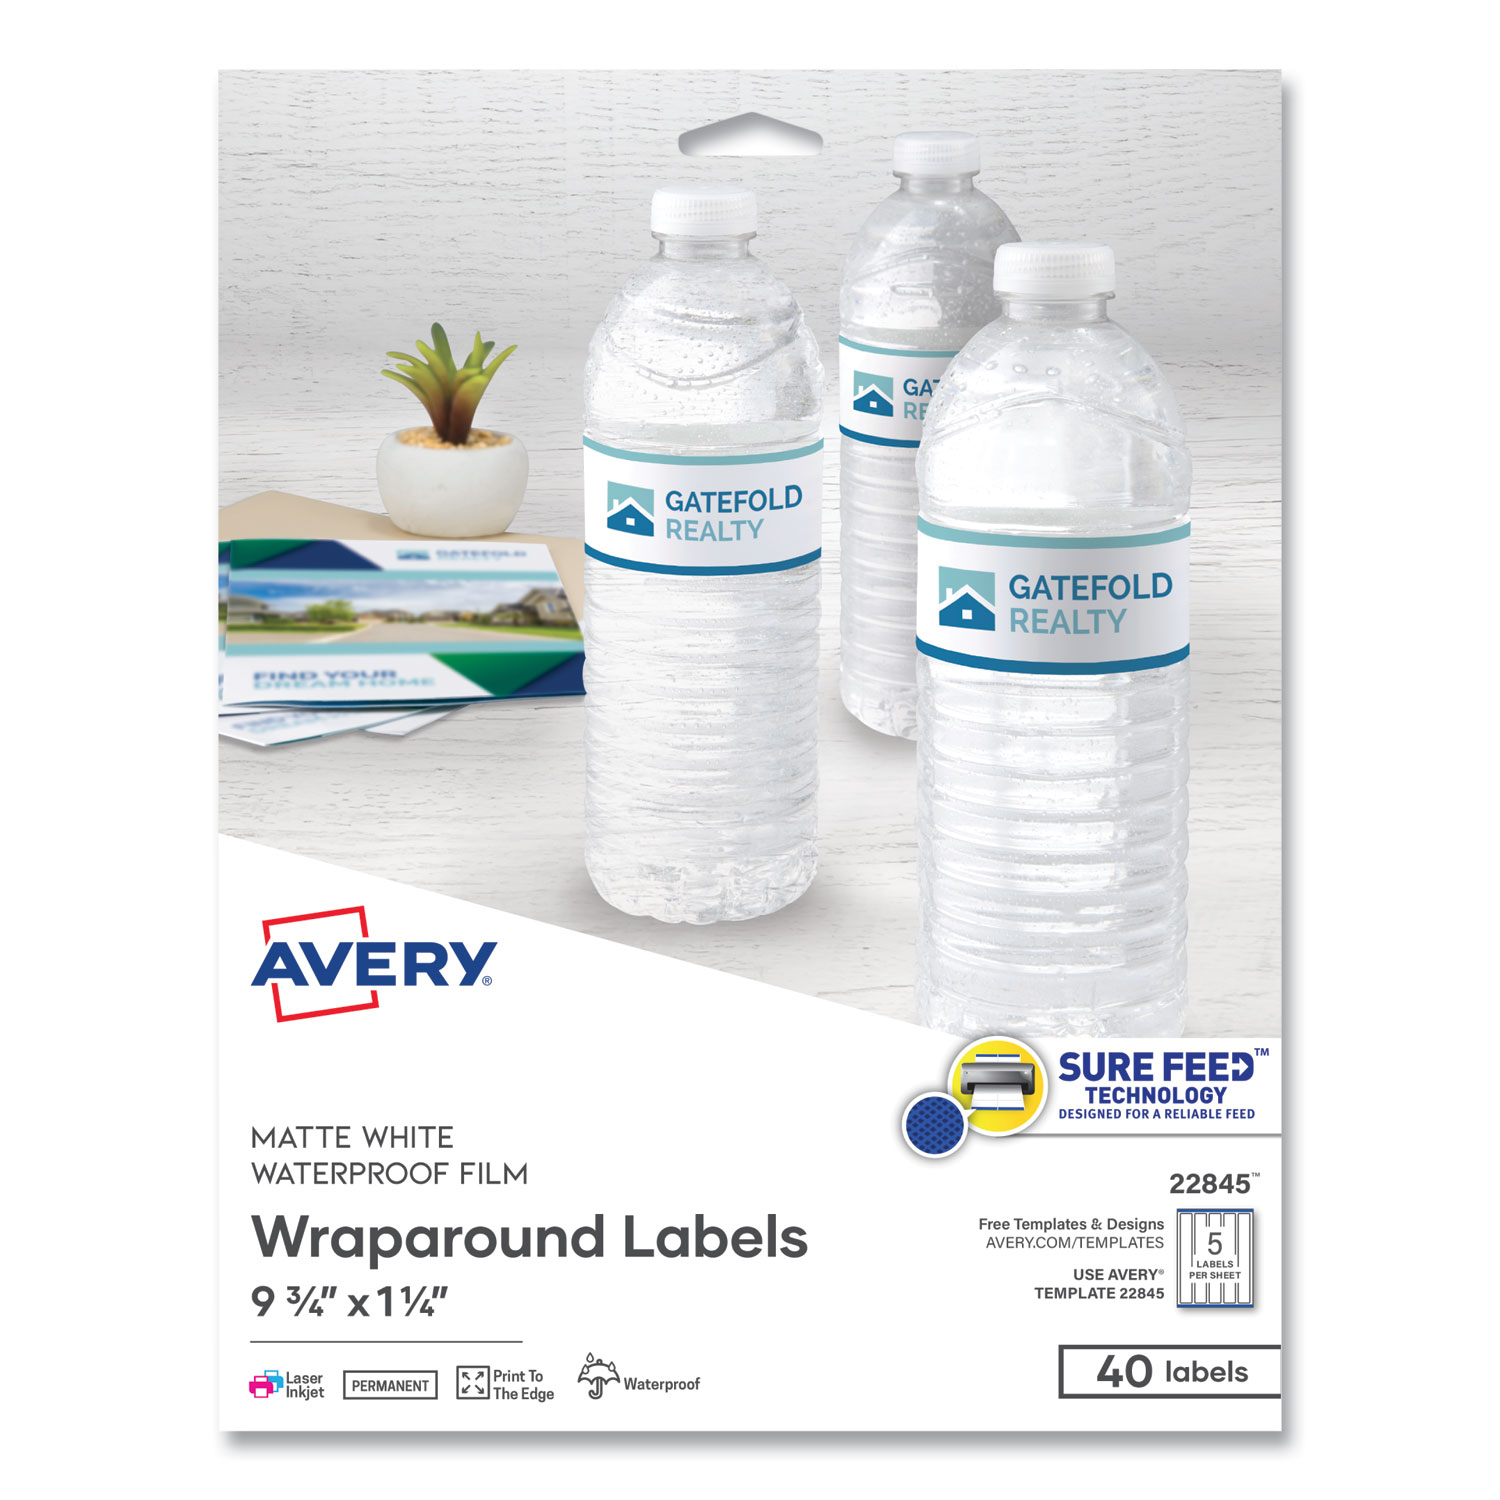 Ave22845 Avery Durable Wraparound Printer Labels Buy On Purpose